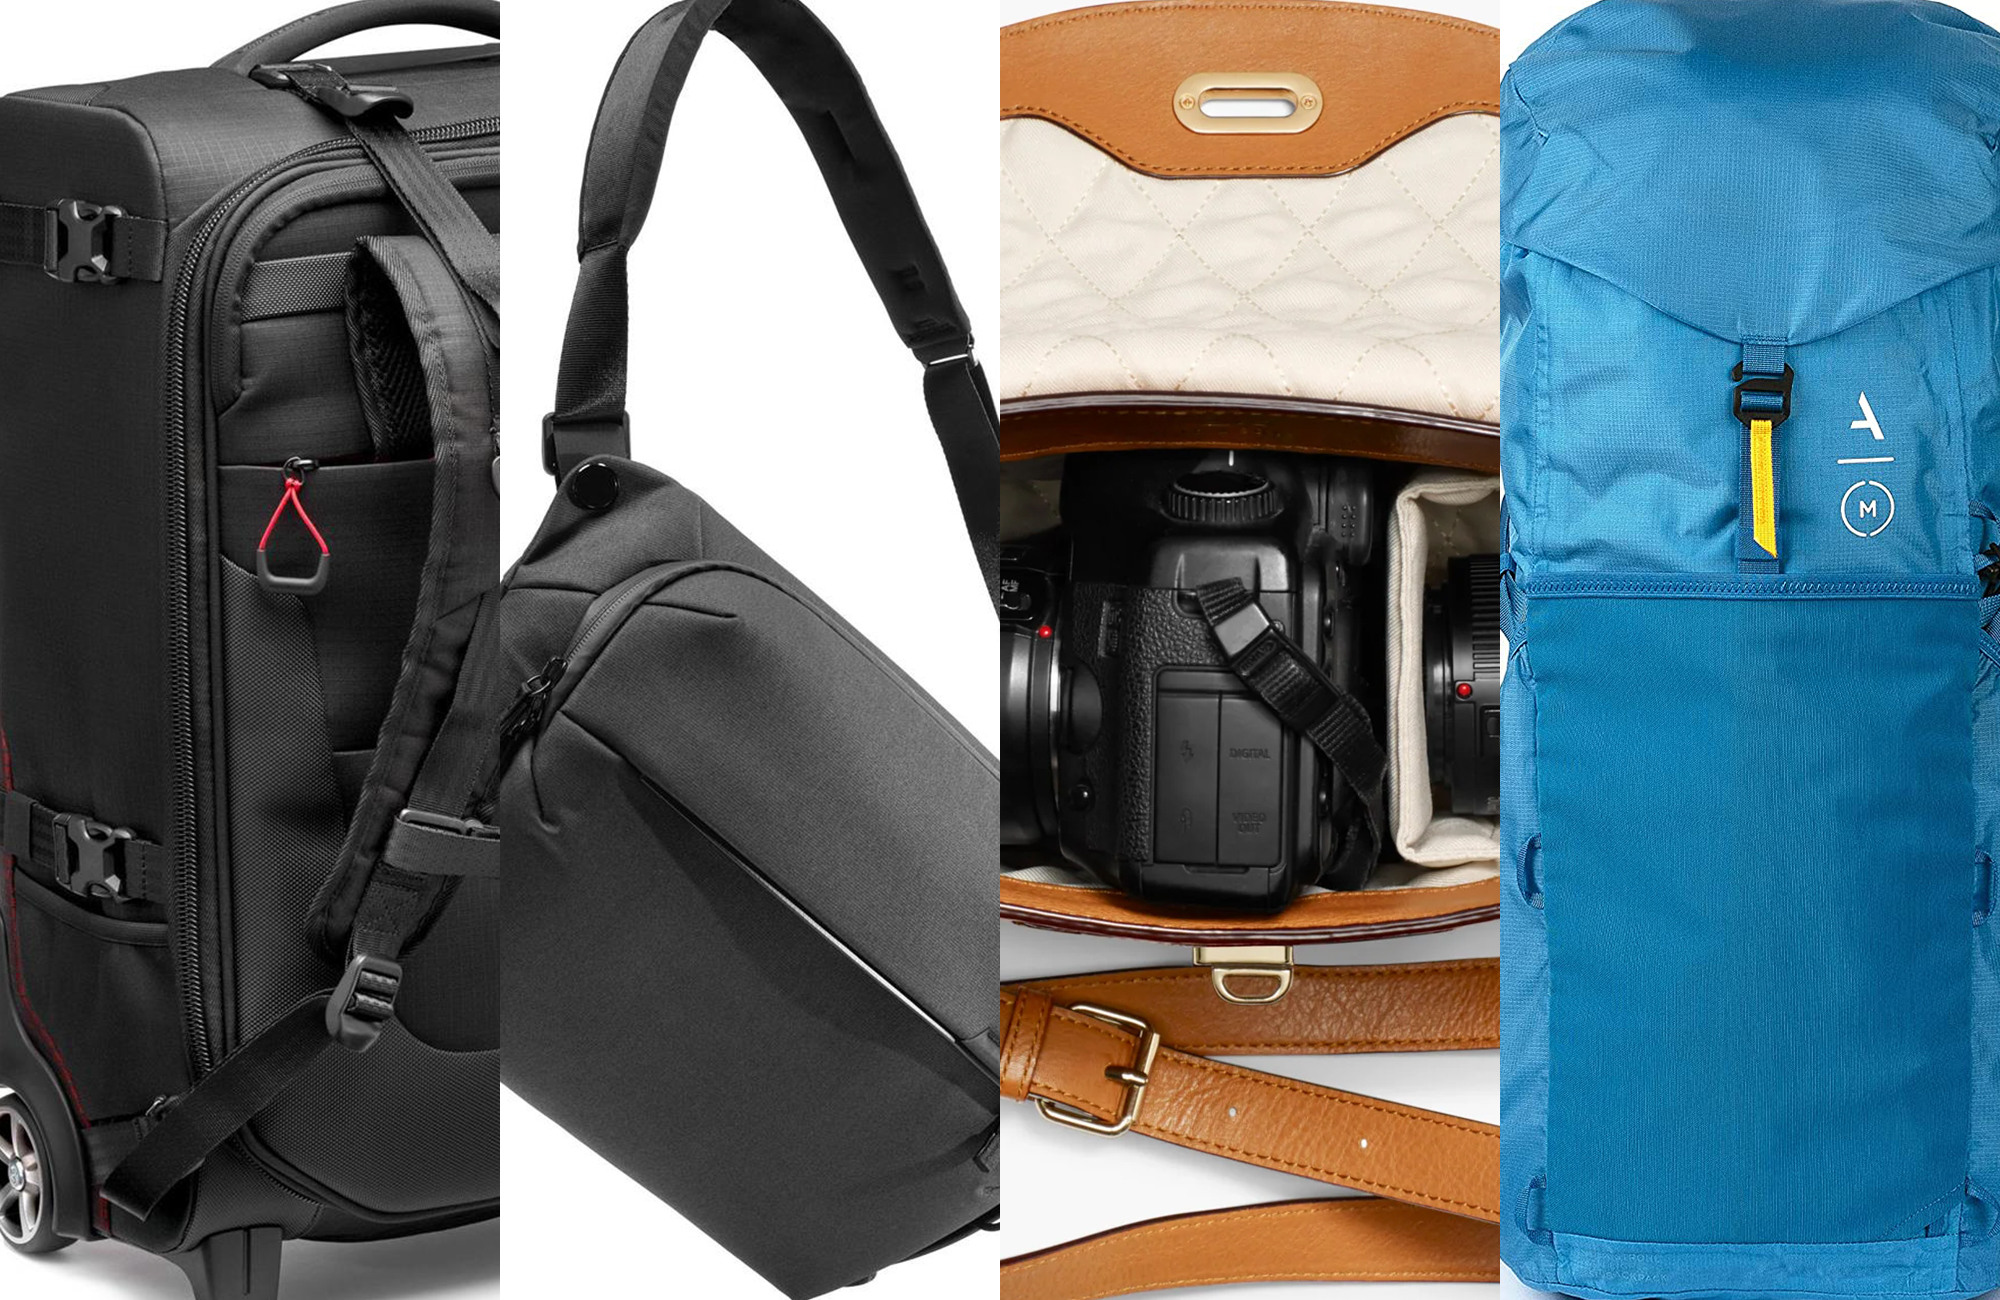 10 Best Camera Bags 2023 - Top-Rated Stylish Camera Bags For Everyday Wear